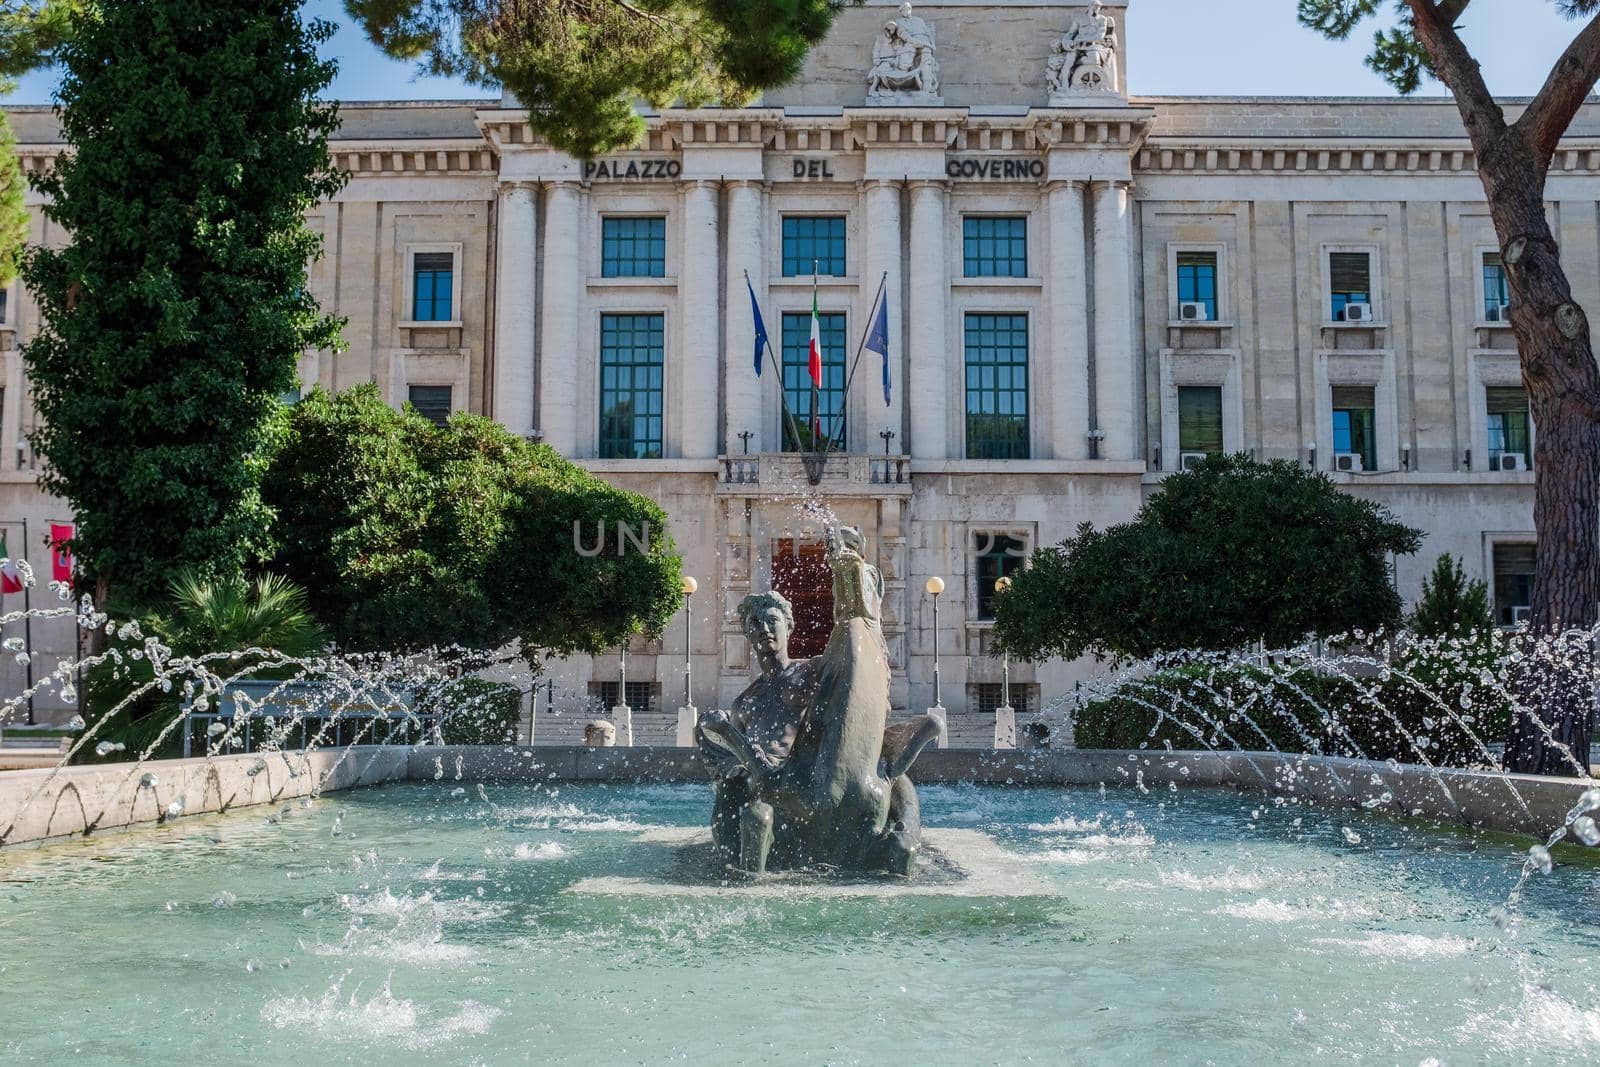 Front view of the fountain "La Pescara", by G. Di Prinzio, bronze sculpture of a woman riding a horse. Government offices for the Province of Pescara (Abruzzo, Italy) in background.